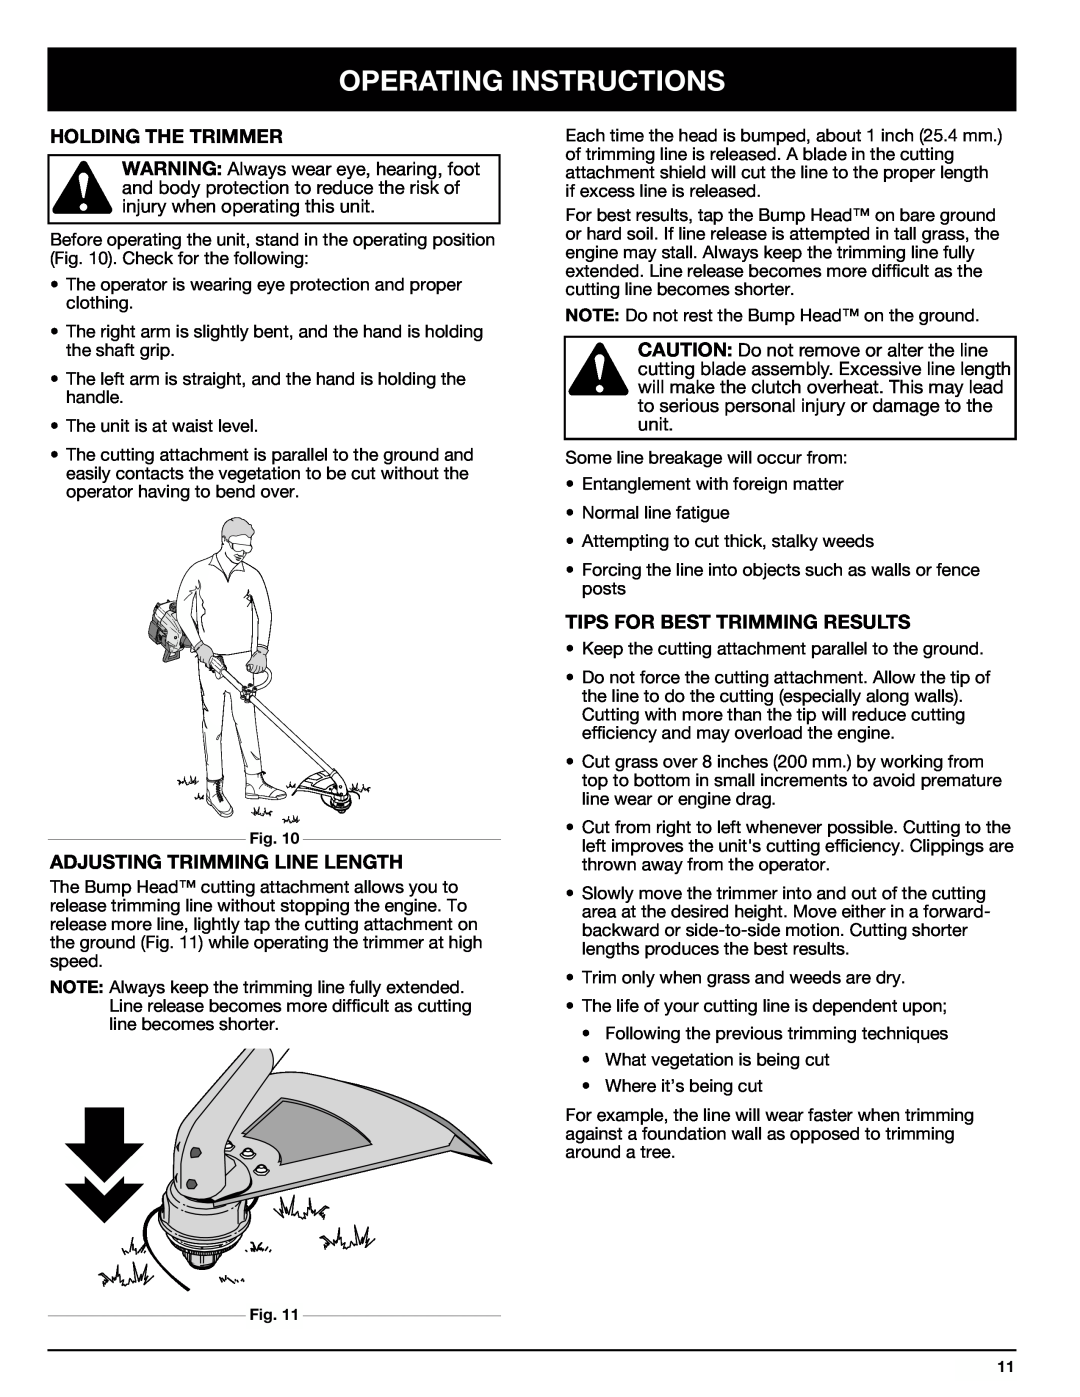 Ryobi 767rj Operating Instructions, Holding The Trimmer, Adjusting Trimming Line Length, Tips For Best Trimming Results 